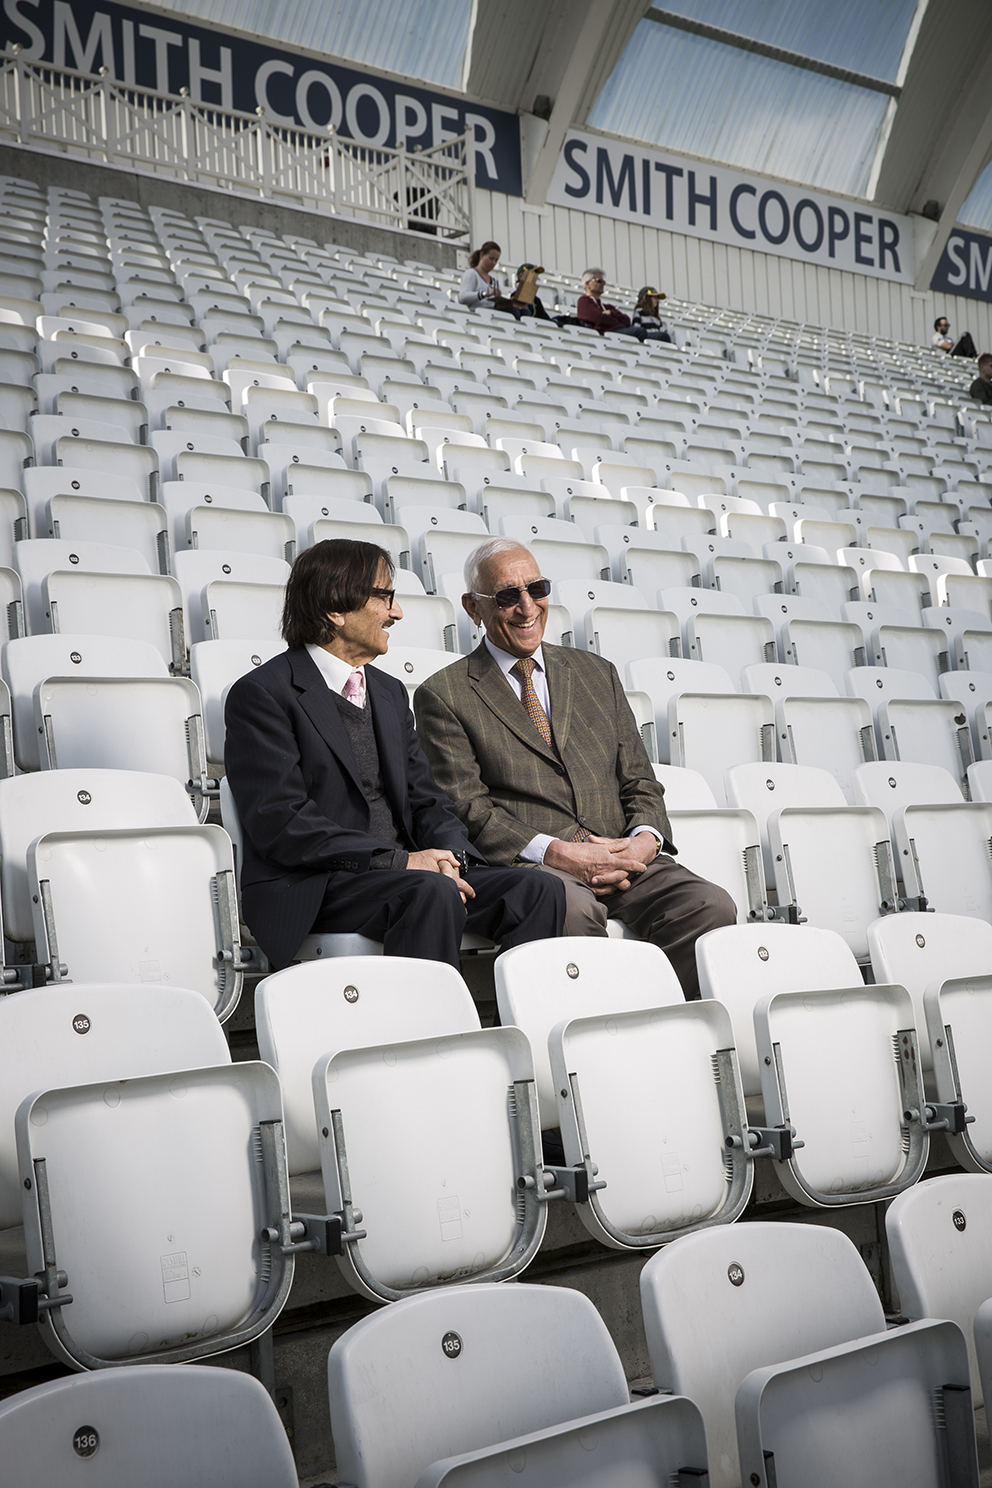 Aslam Lone and Mohammed Irshad enjoying the cricket at Trent Bridge, shot for the Two's Company feature for the Guradian Weekend